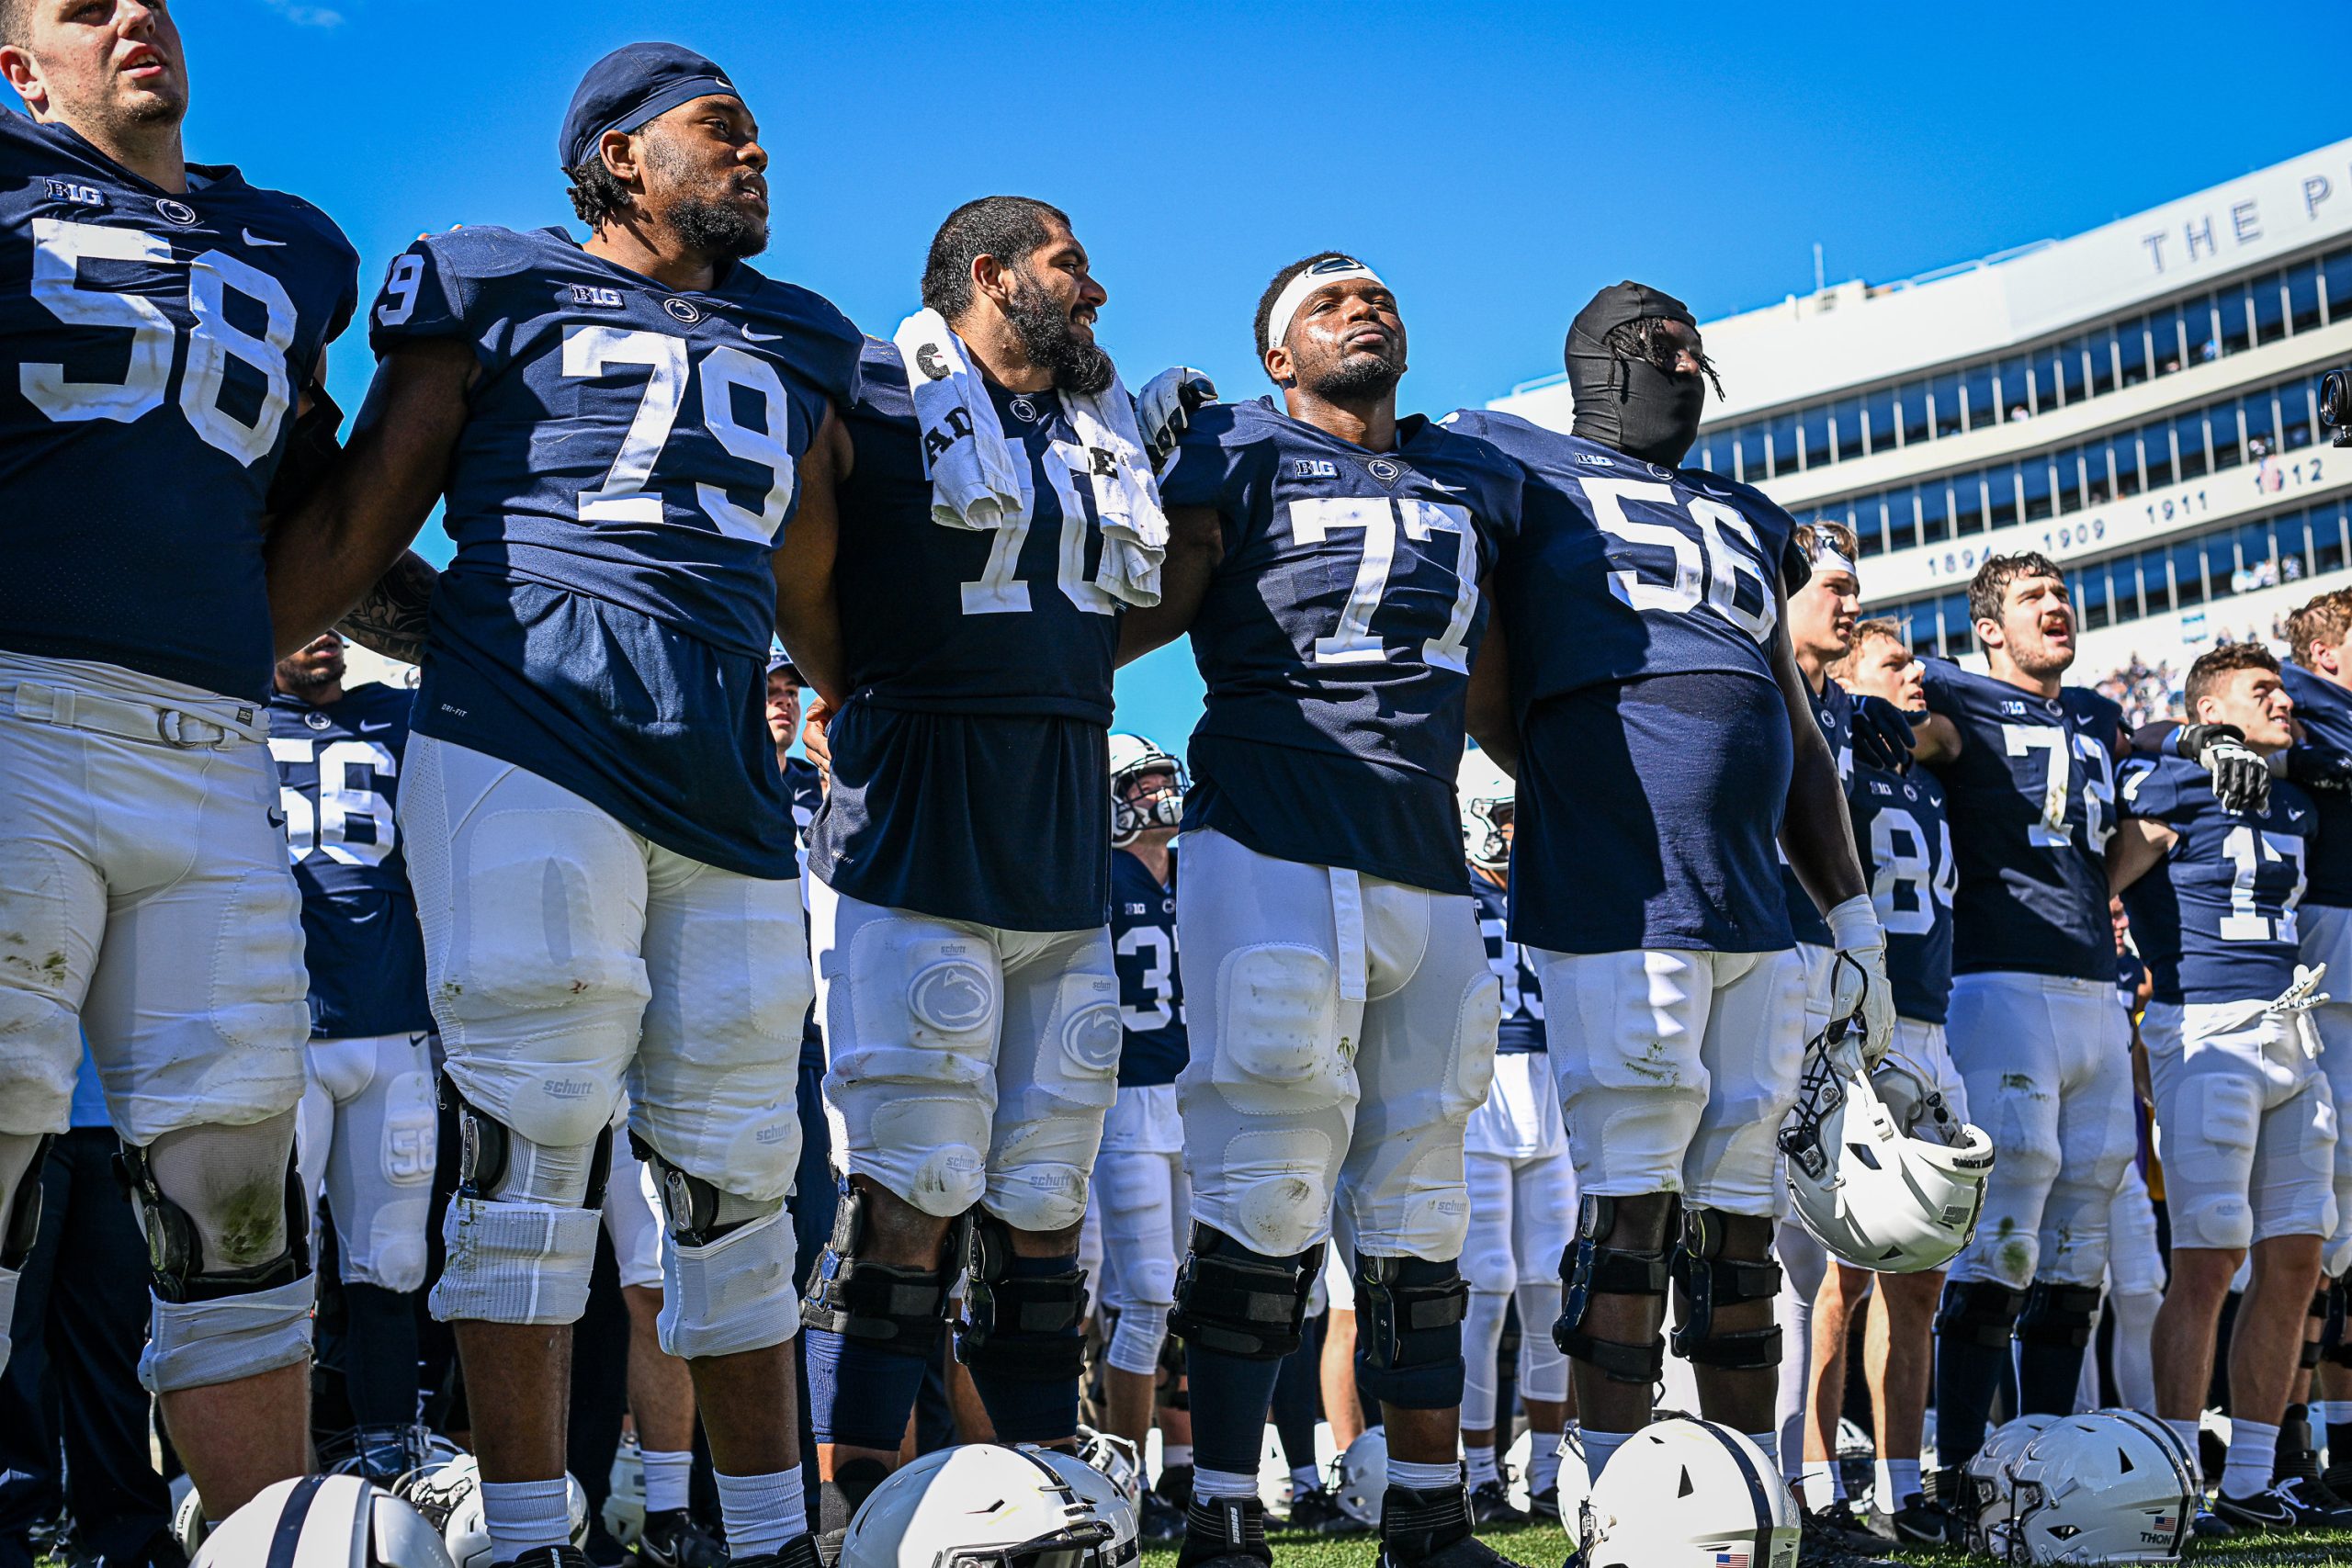 Game Preview: (11) Penn State vs. Northwestern